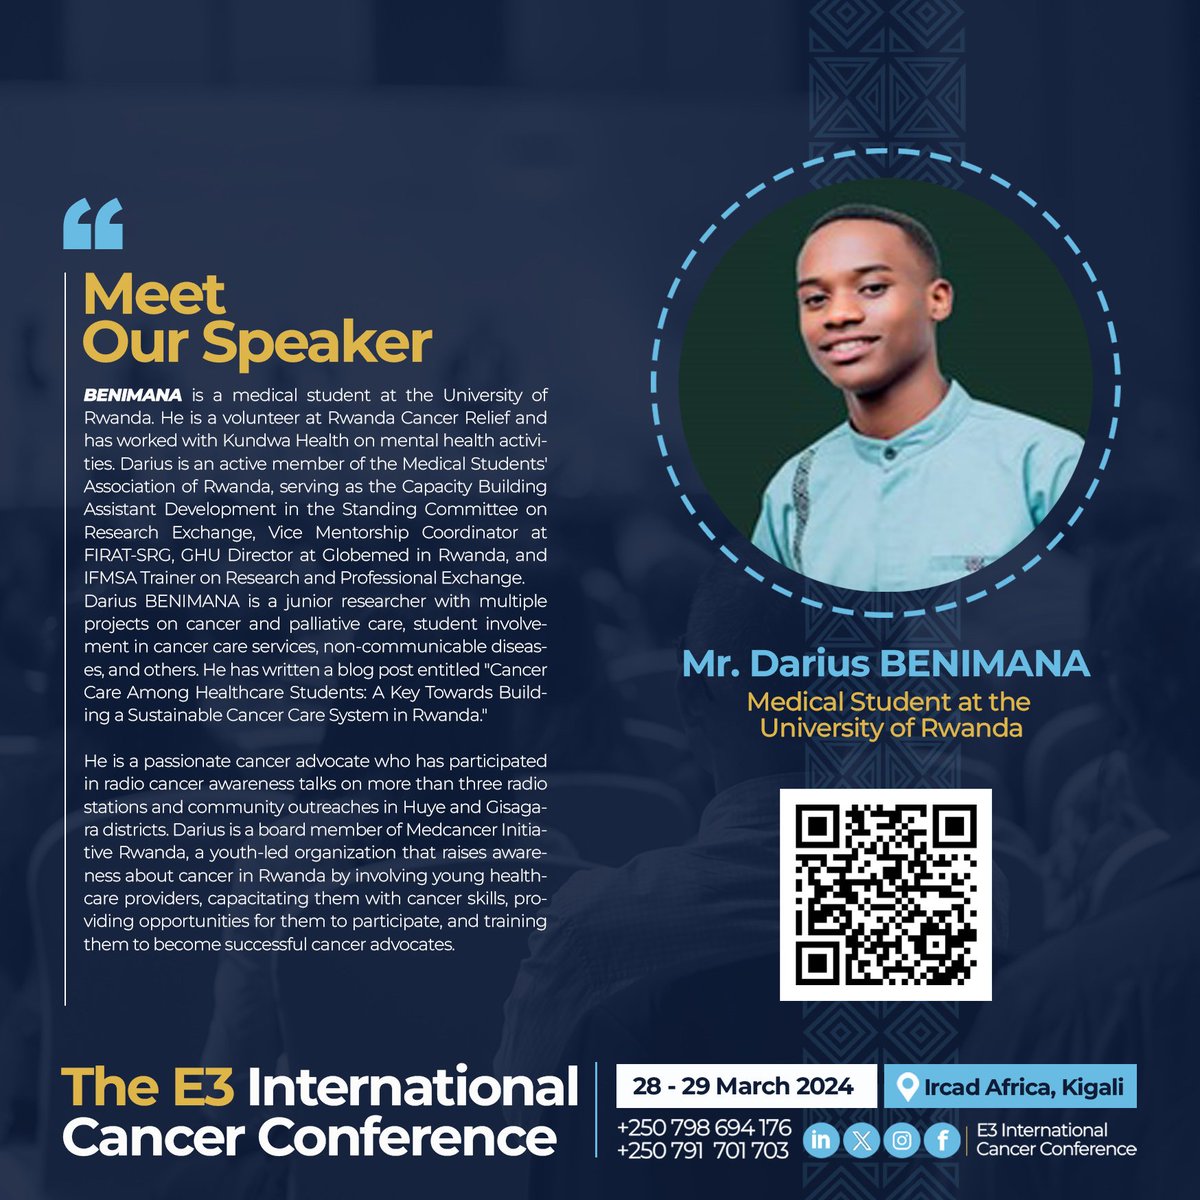 Meet Darius Benimana, a dedicated medical student at the University of Rwanda and a passionate advocate for cancer care. Join us at the E3 Conference to hear Darius share his insights on building a sustainable cancer care system in Rwanda. #E3Conference #CancerAdvocate #e3icc